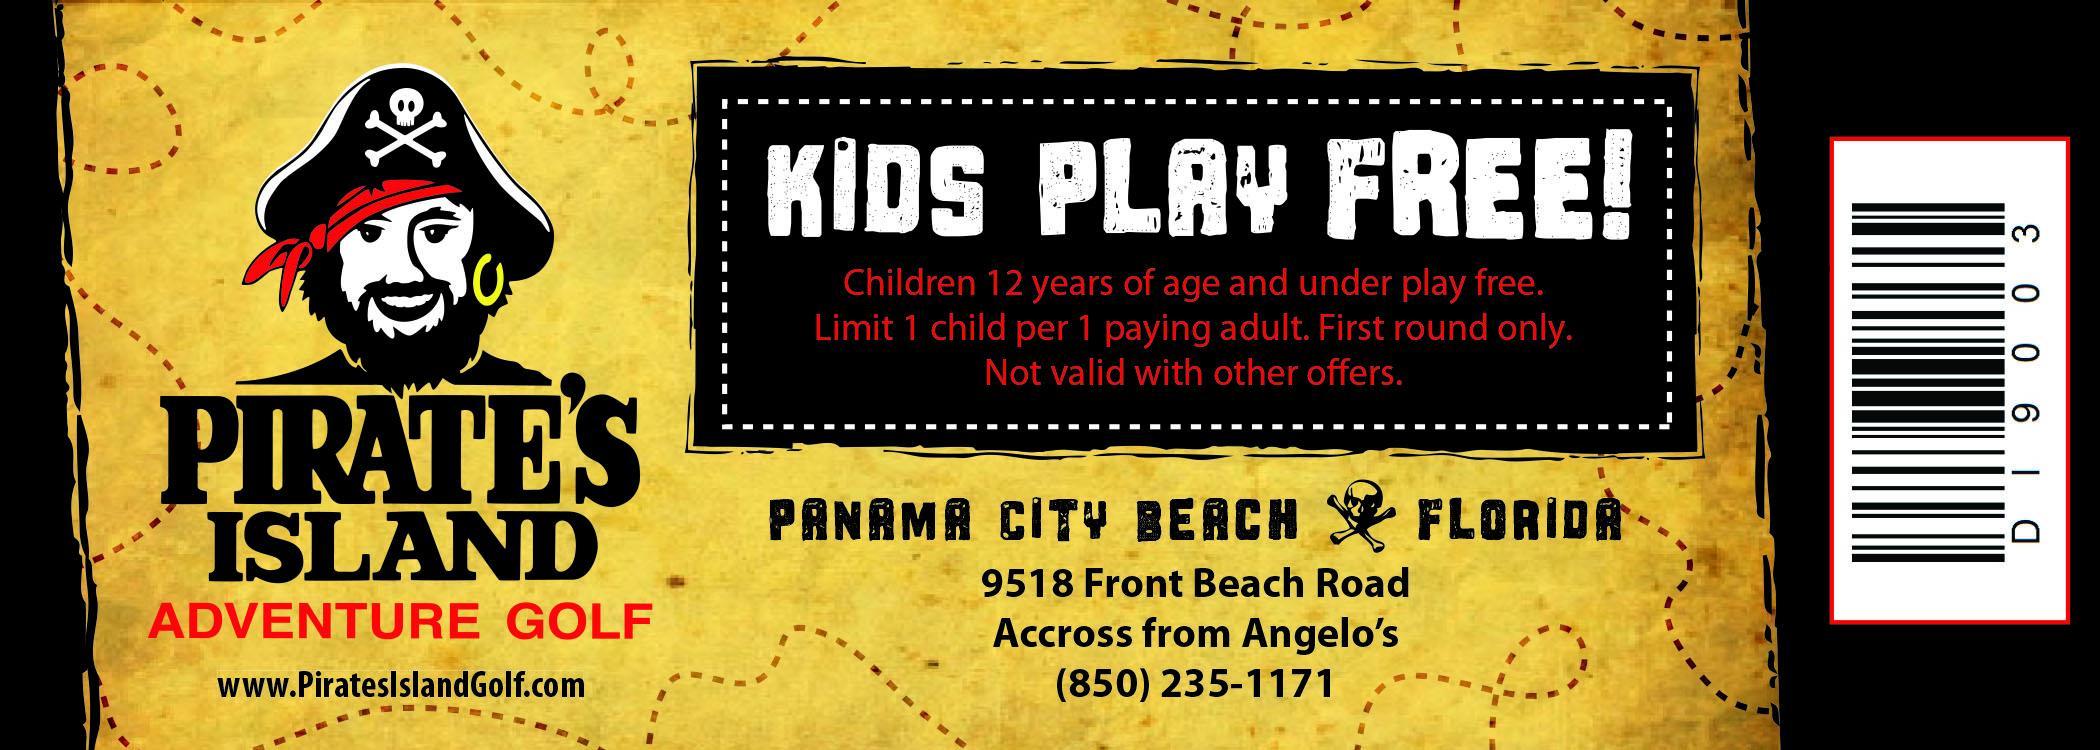 Kids Play for FREE